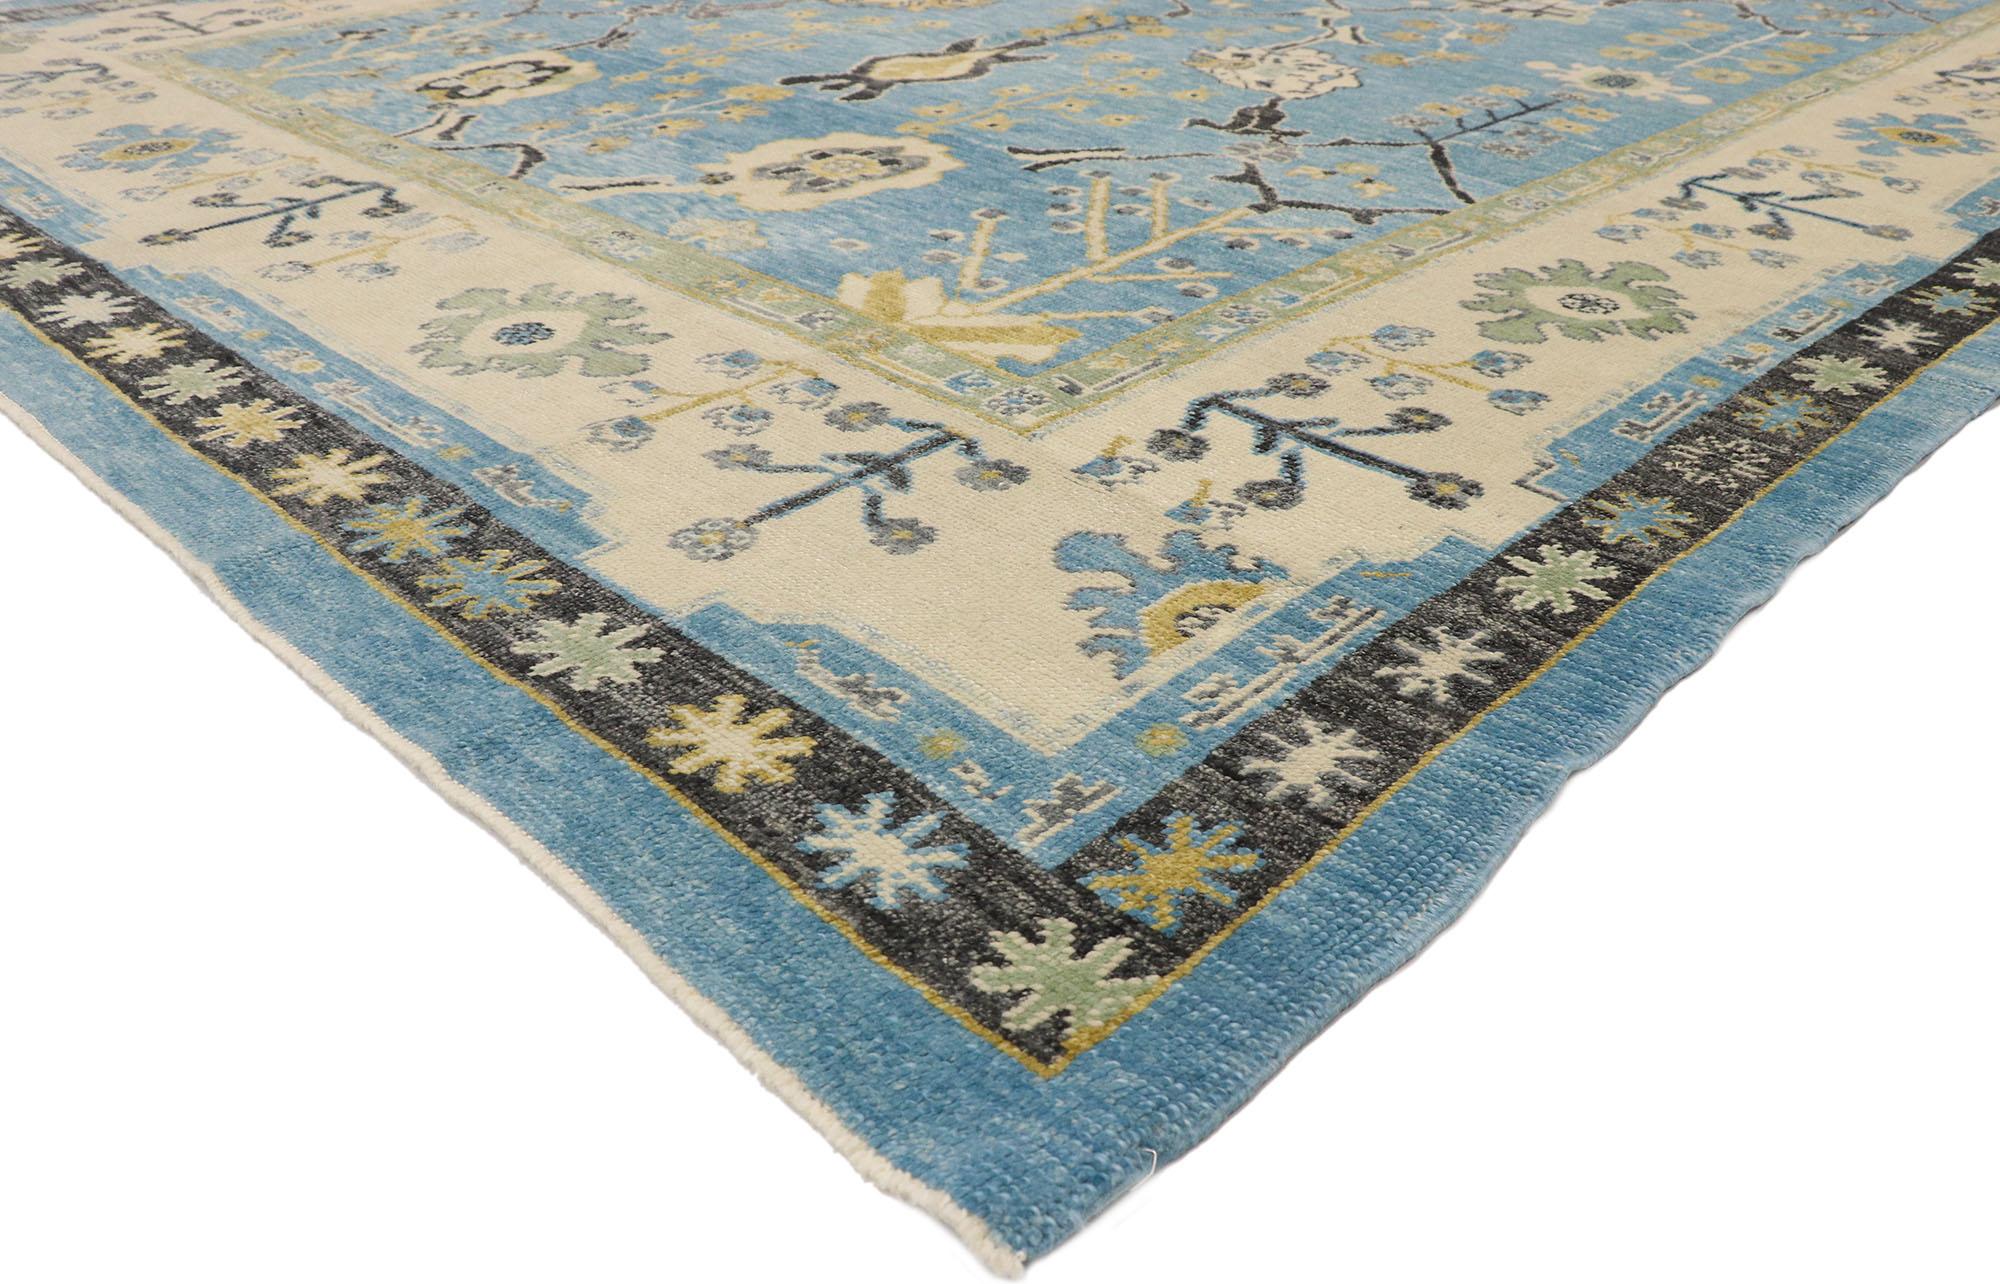 52785, New Sky Blue Contemporary Turkish Oushak Rug with Modern Coastal Style. Blending elements from the modern world with vibrant colors, this hand knotted wool contemporary Turkish Oushak rug will boost the coziness factor in nearly any space.